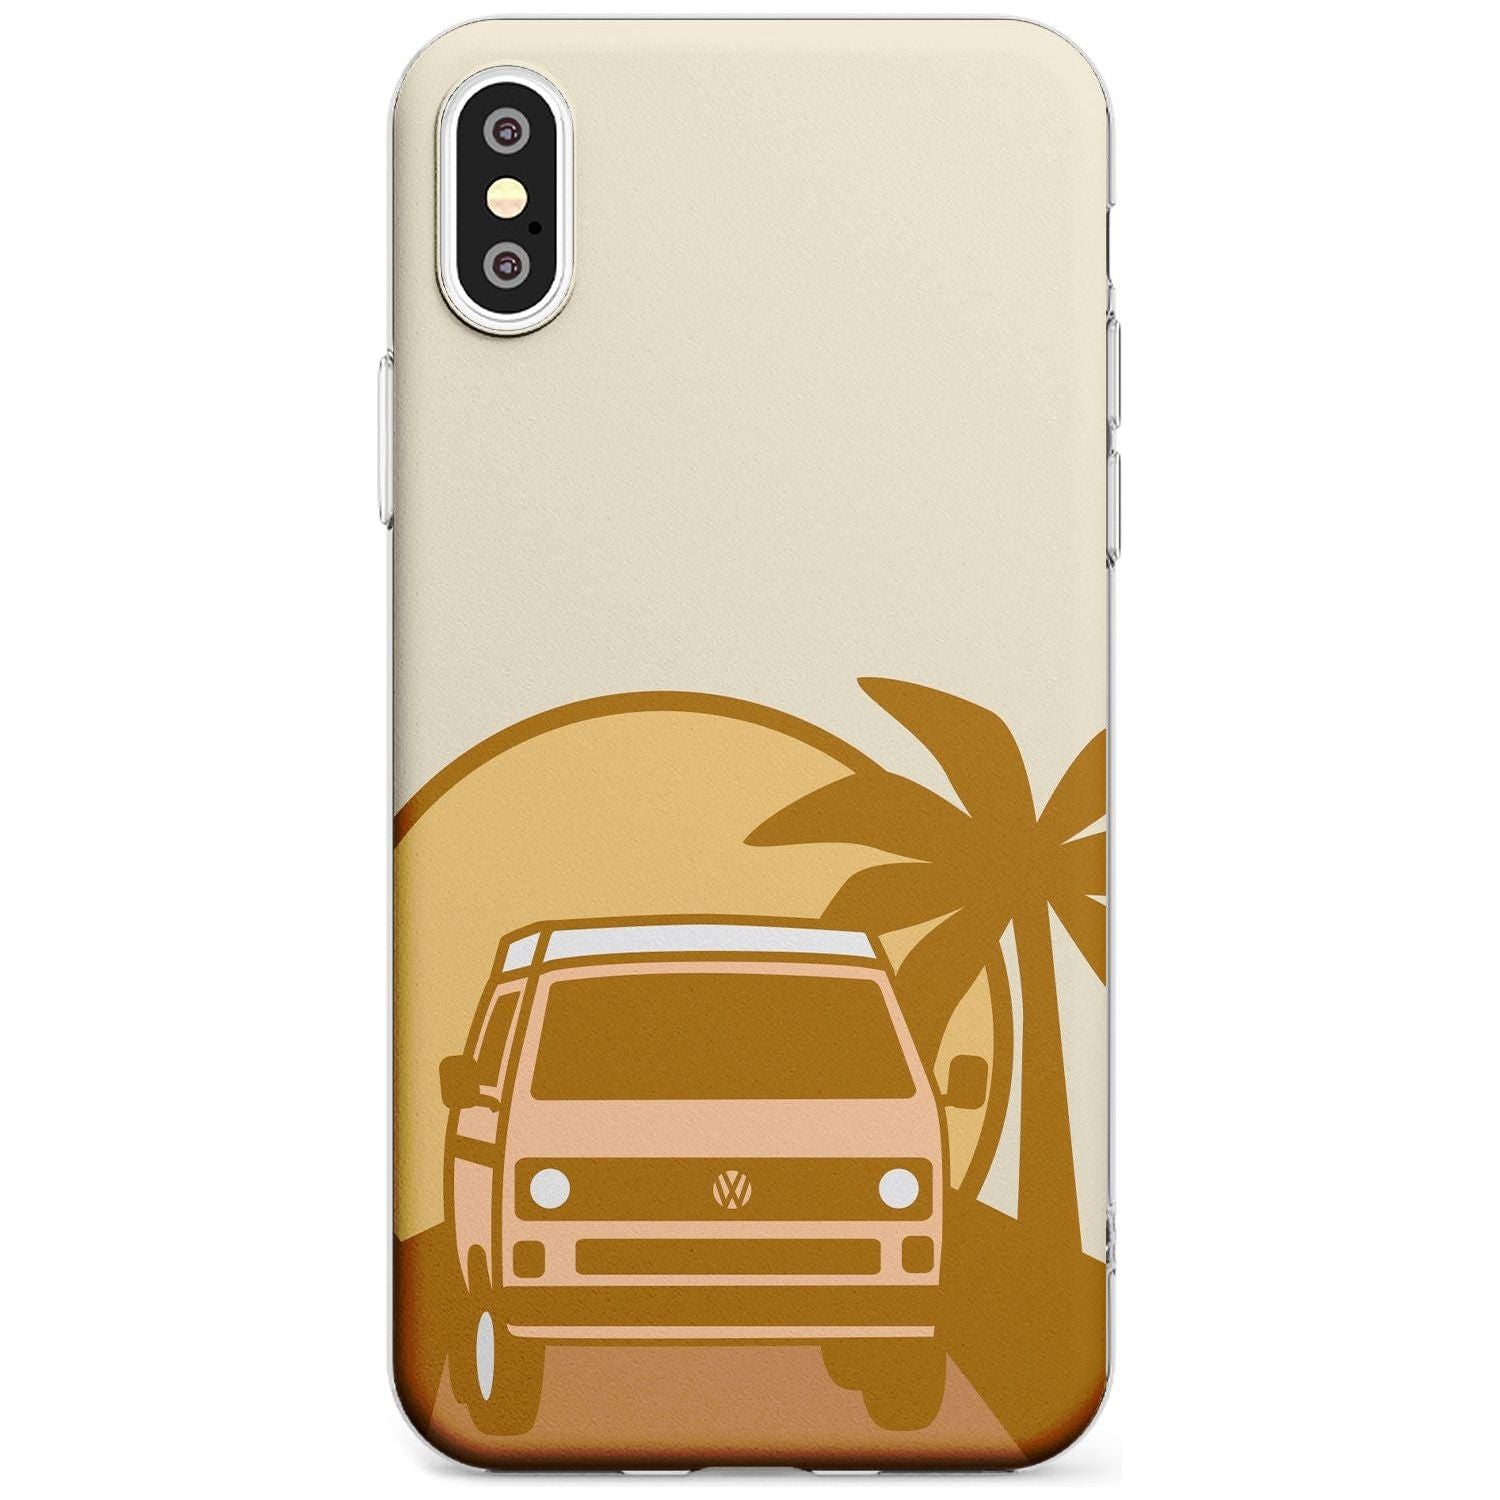 Camp Cruise Black Impact Phone Case for iPhone X XS Max XR